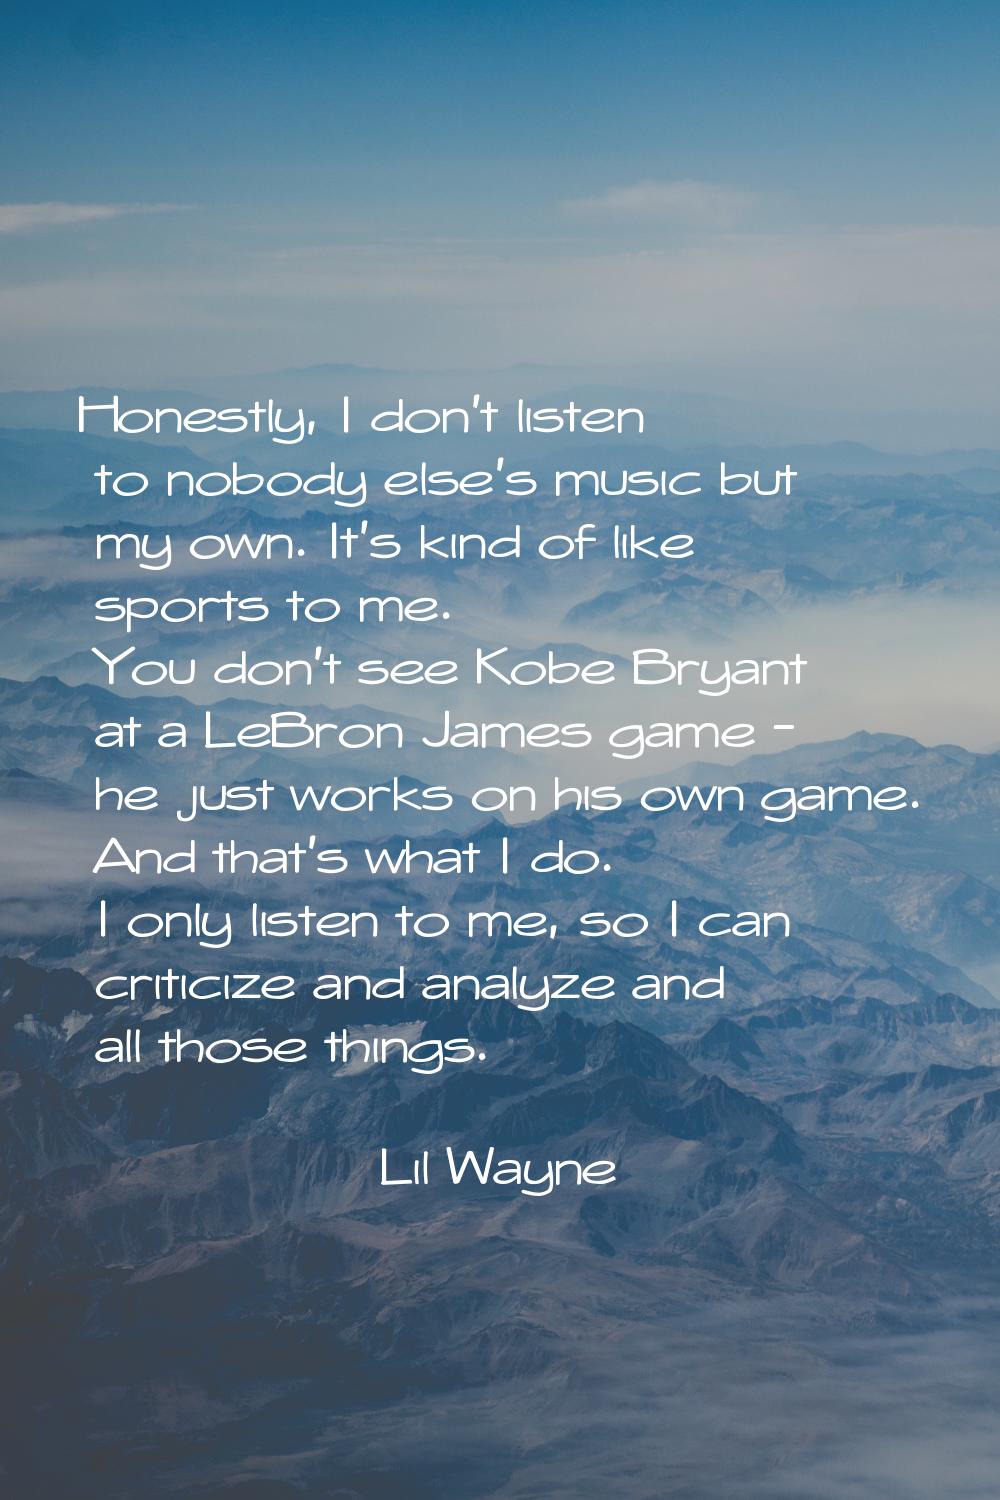 Honestly, I don't listen to nobody else's music but my own. It's kind of like sports to me. You don